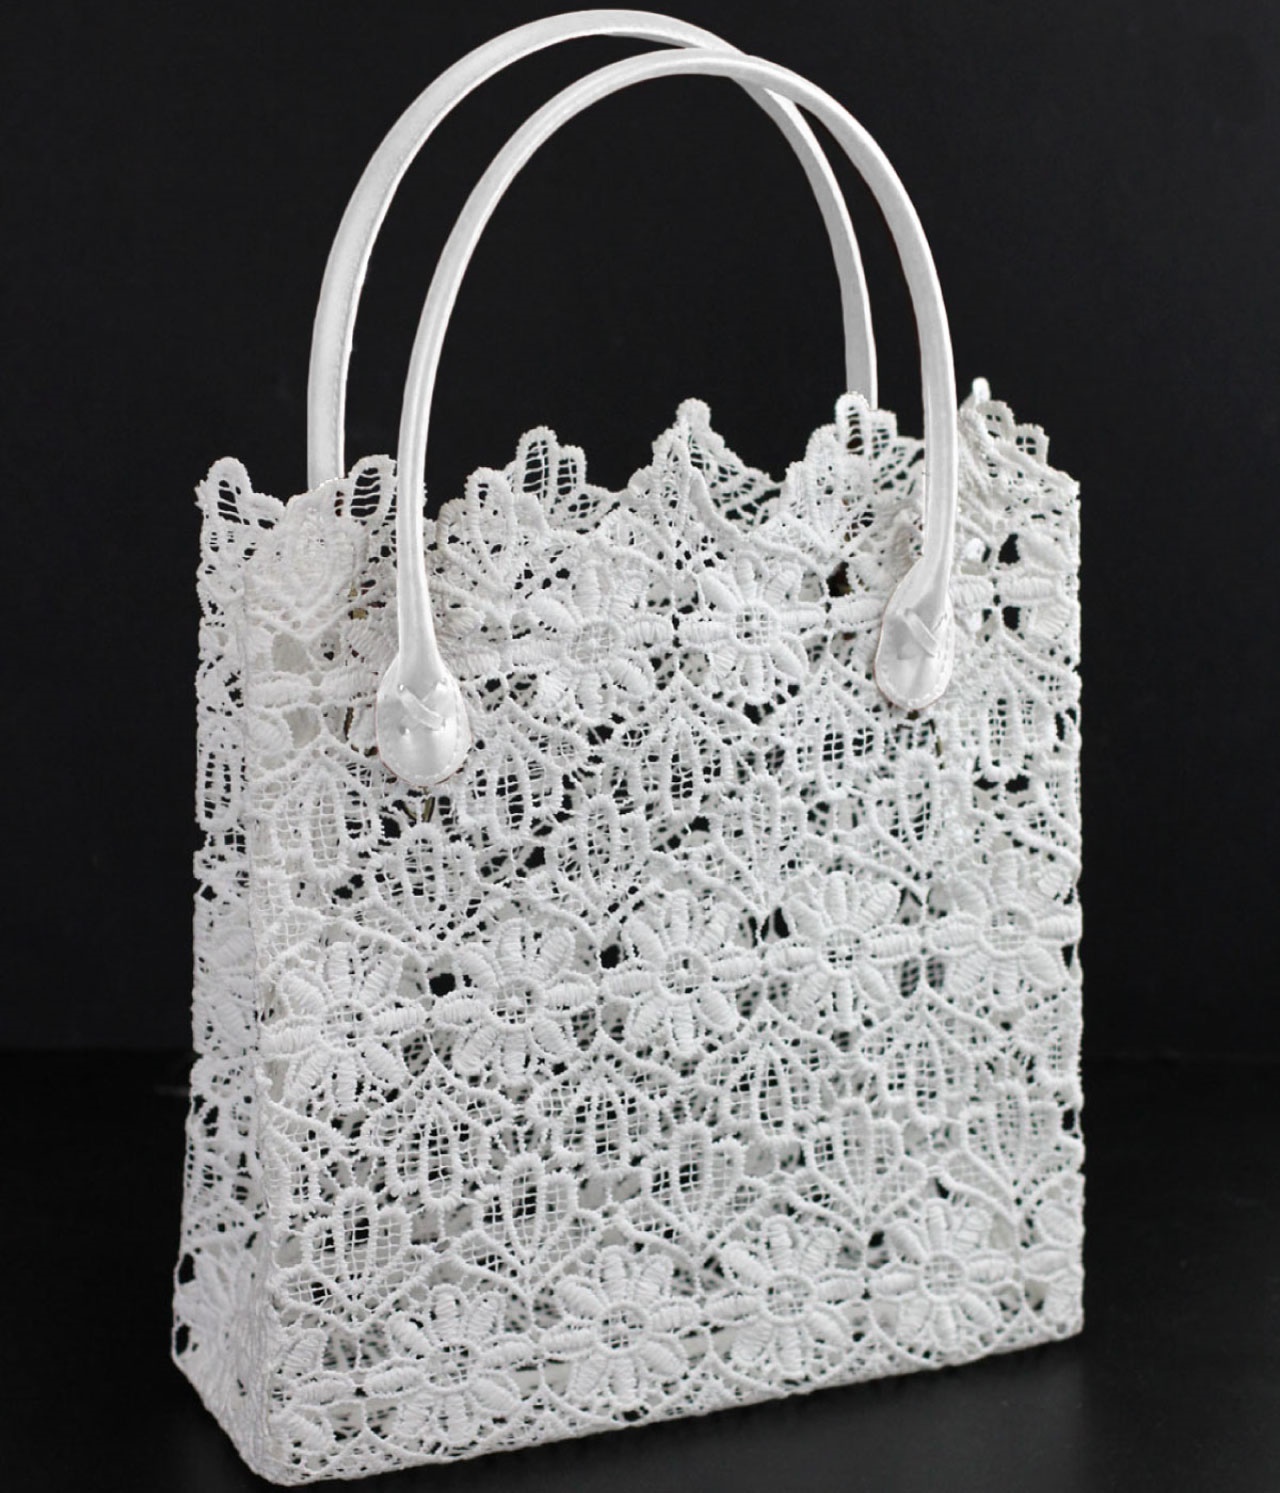 11" x 11.5" x 4" White Lace Bag with White Handles